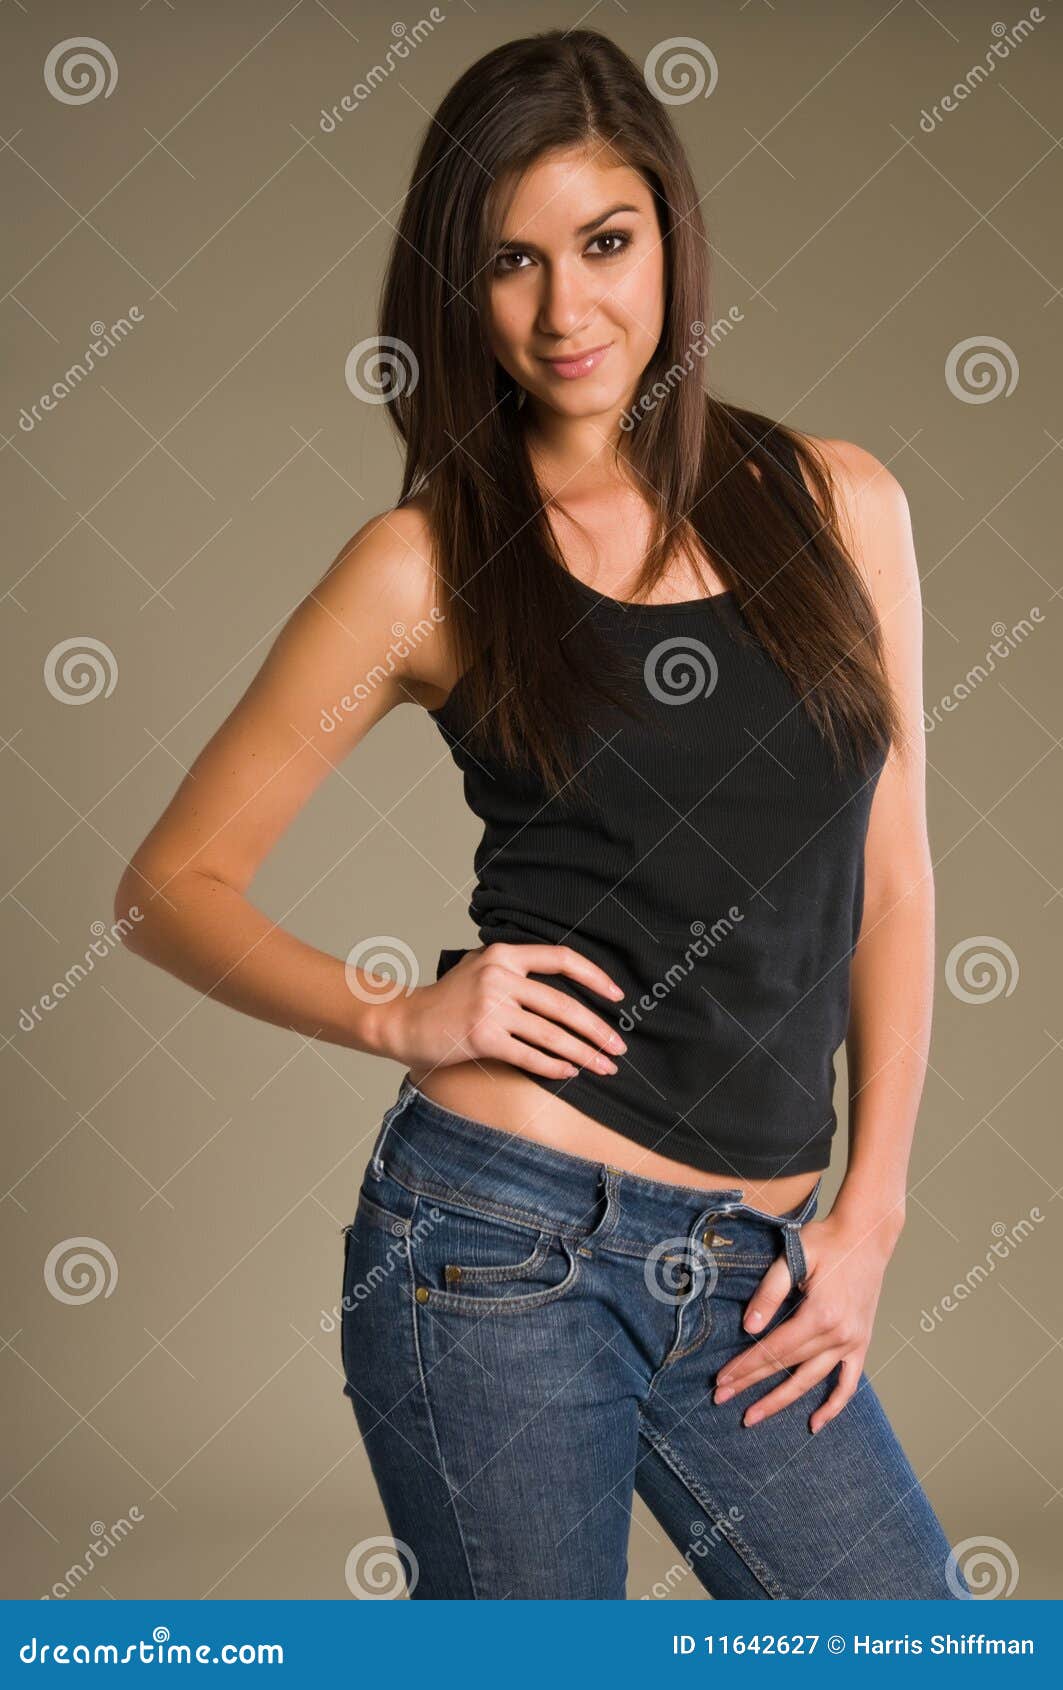 Brunette stock image. Image of blouse, gorgeous, bluejeans - 11642627